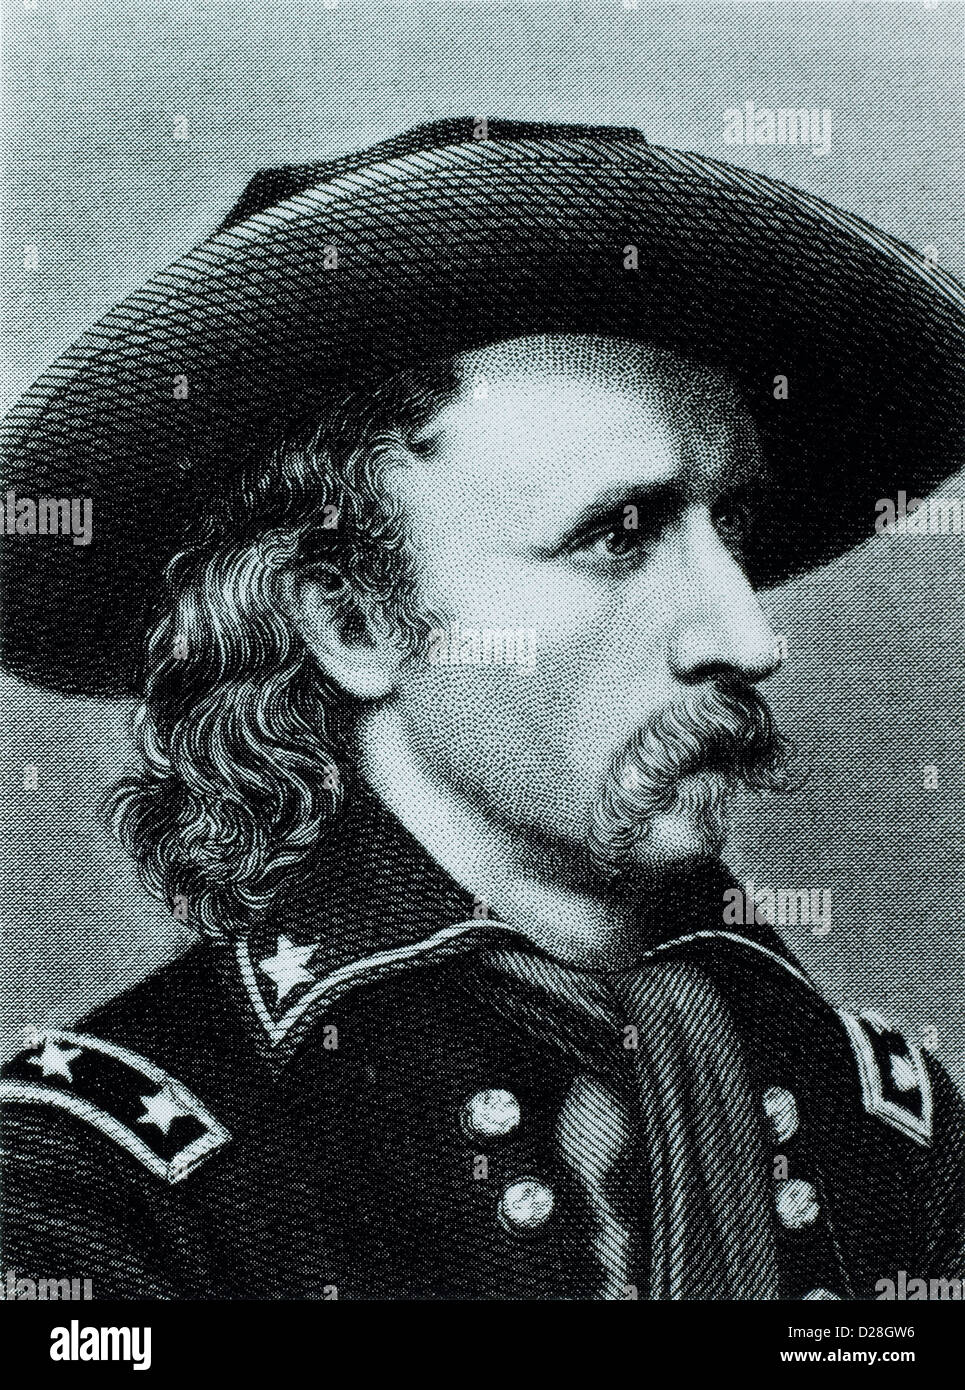 George Armstrong Custer (1839-1876), American Army Officer, Killed at the Battle of Little Big Horn, Portrait, Circa 1860's Stock Photo